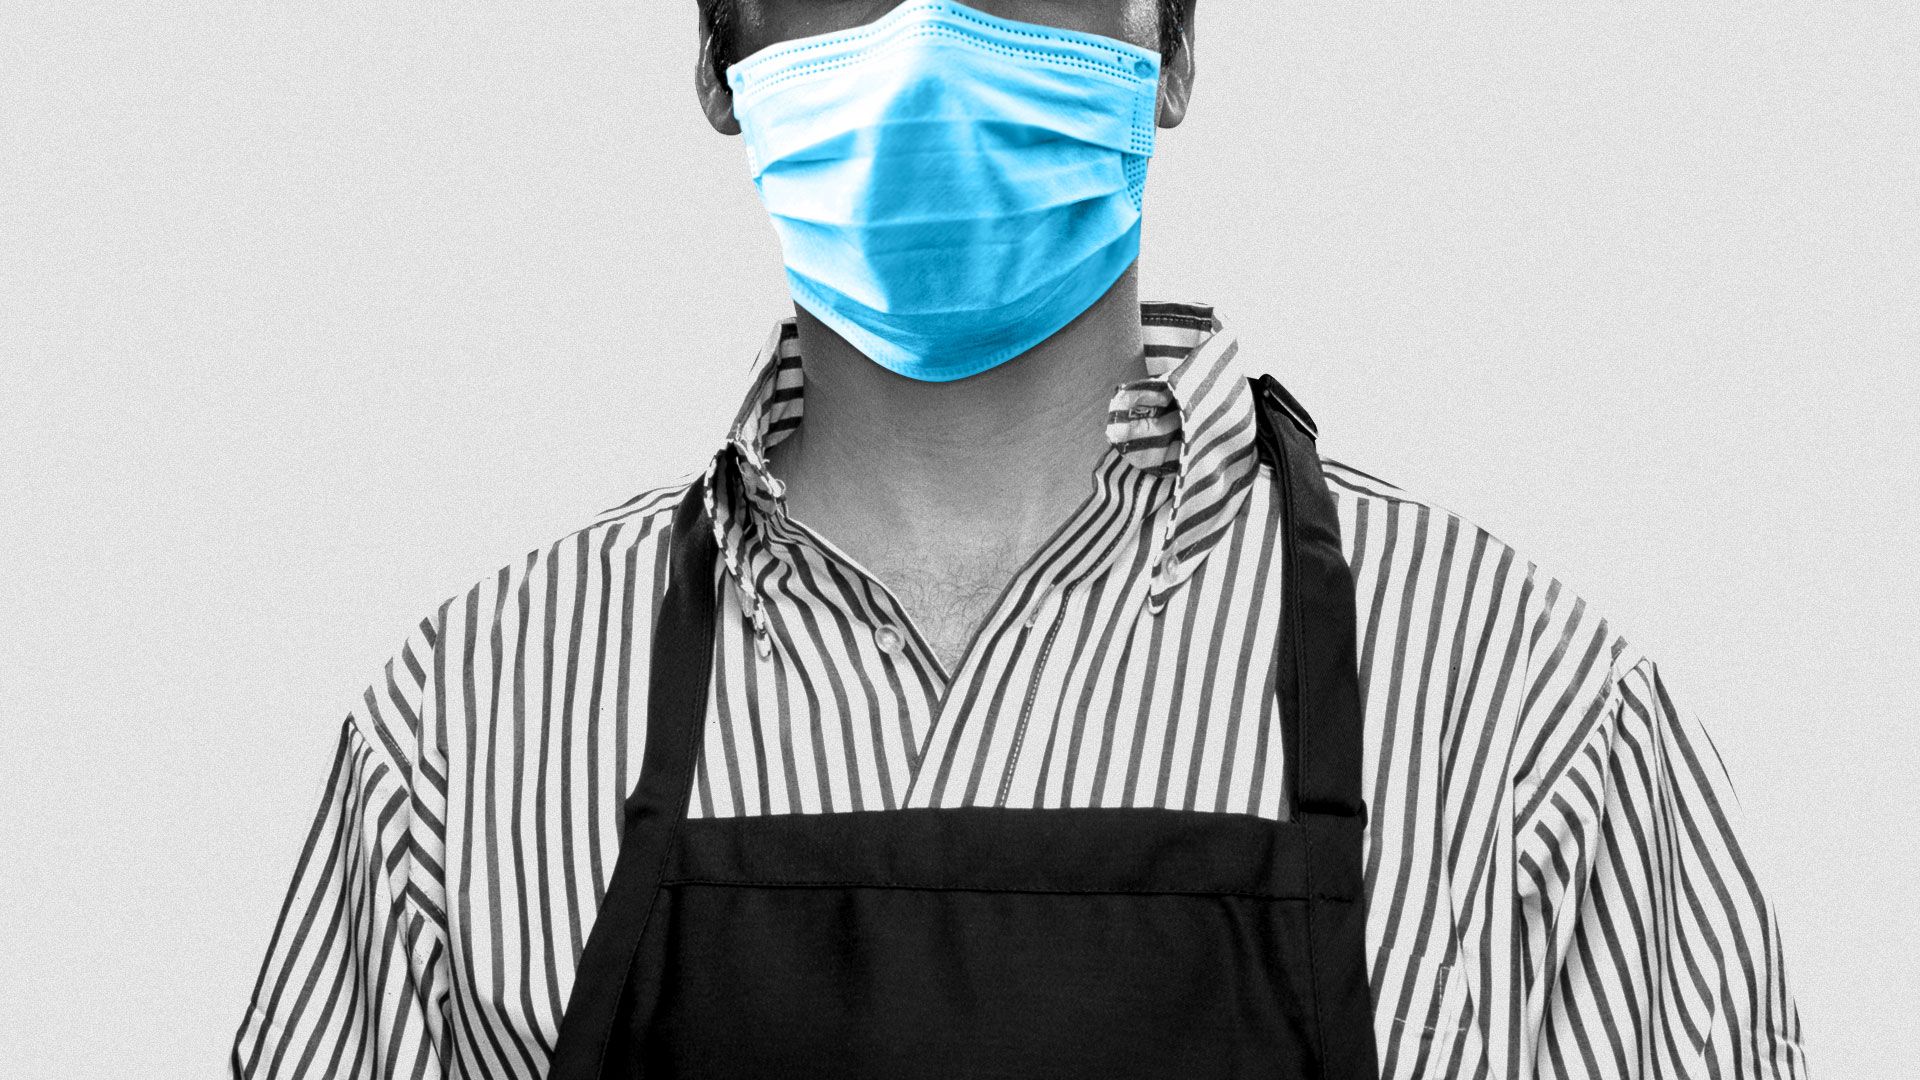 Illustration of fast food worker with a face mask.